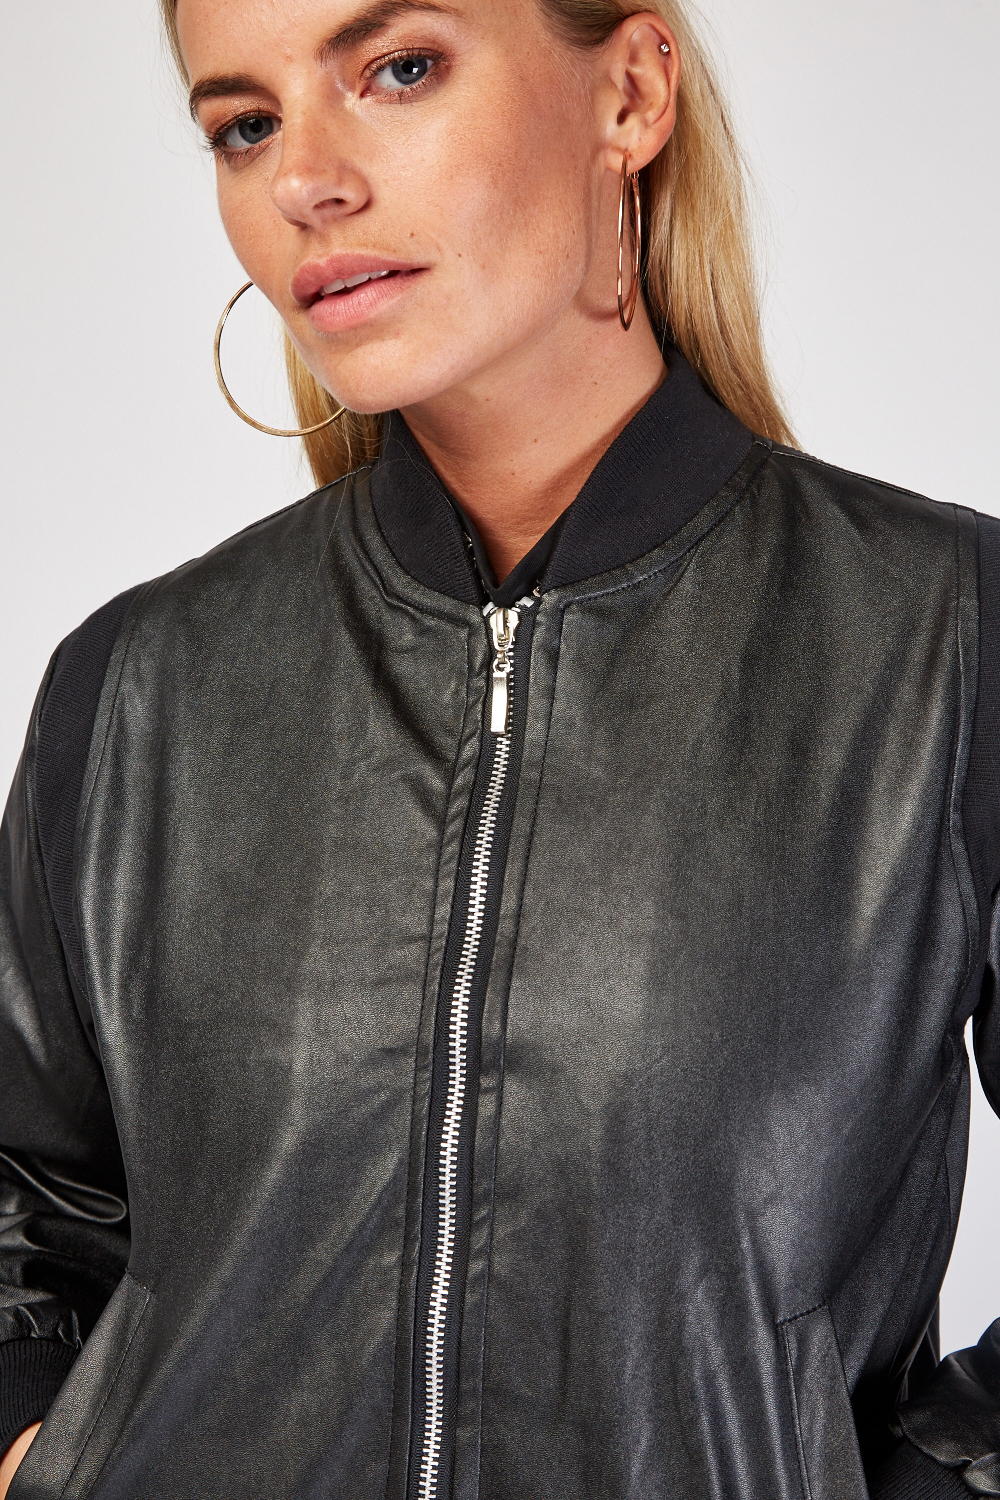 Ribbed Trim PVC Leather Jacket - Just $7